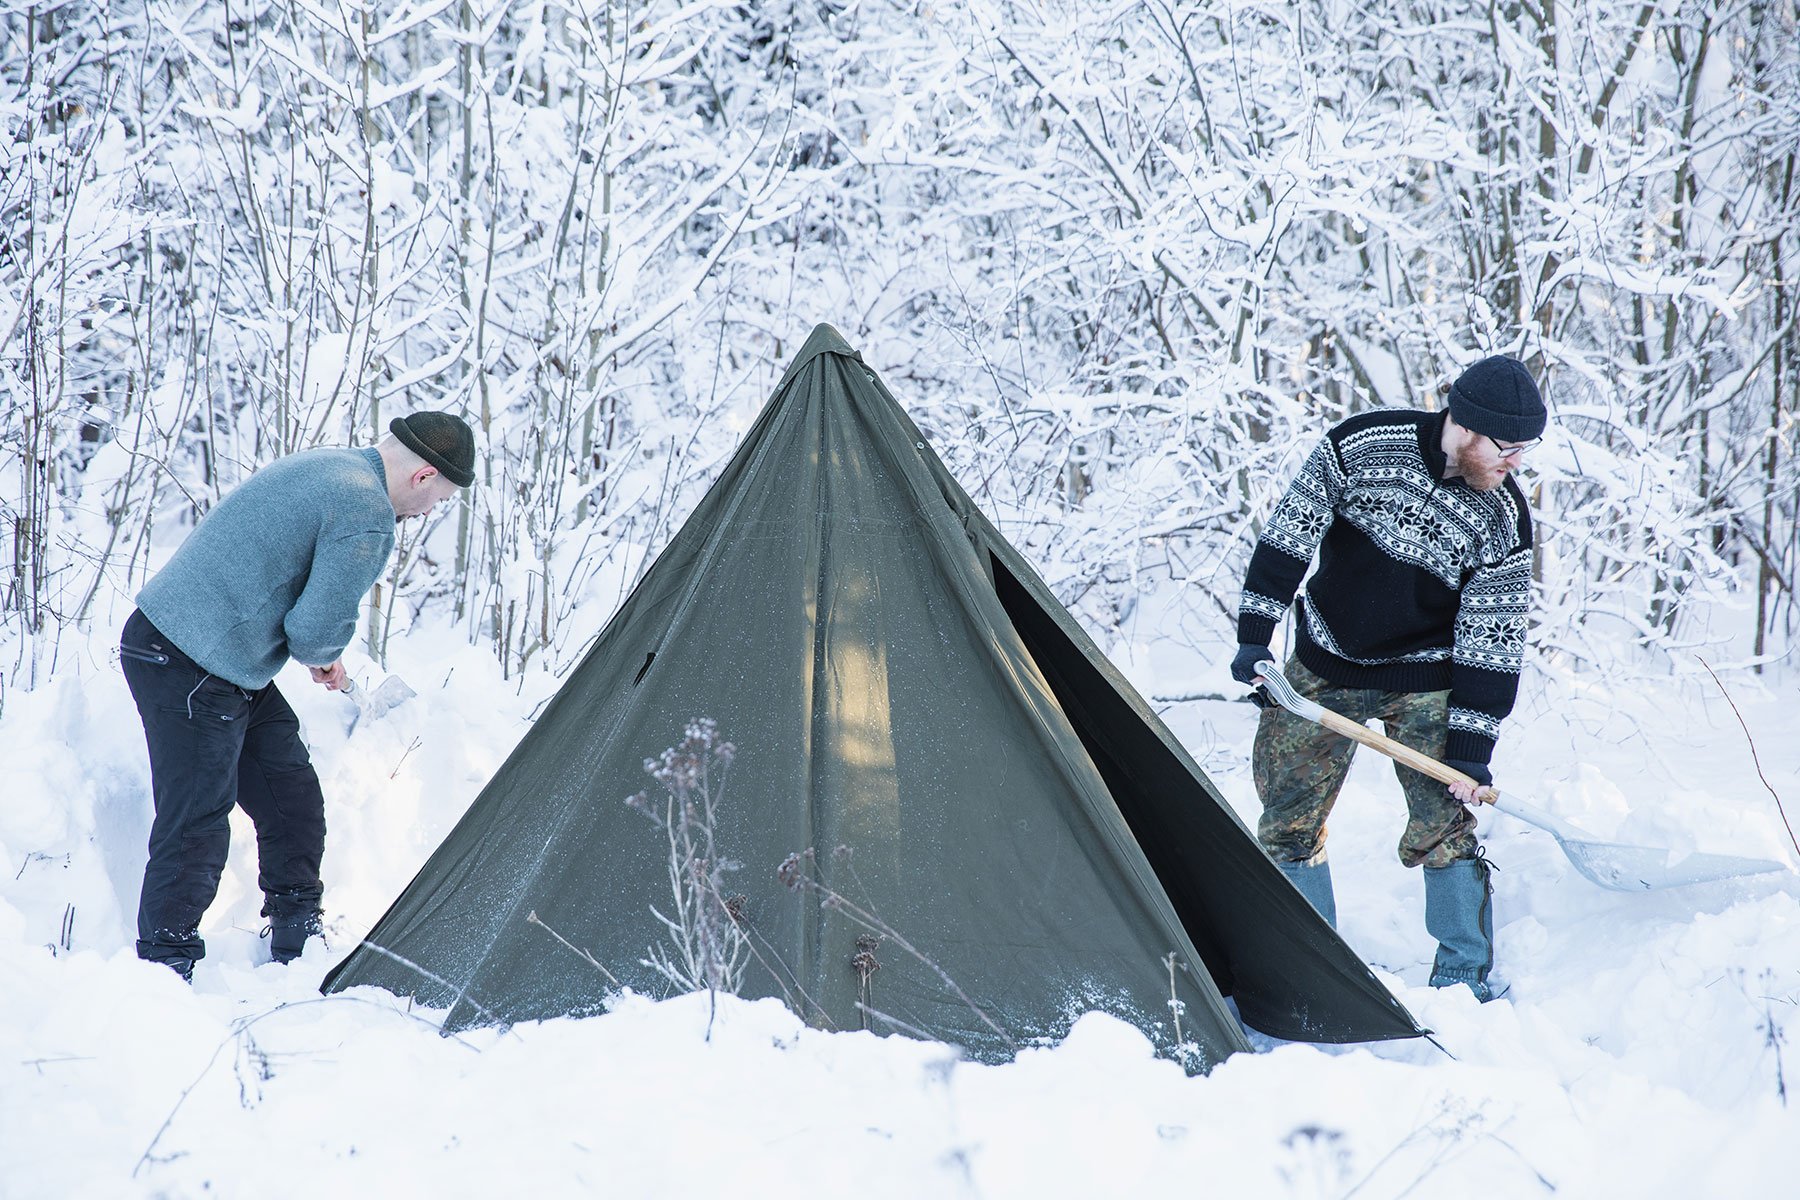 Two guys at a snowy forest edge on either side of a tent set up in the snow, showeling snow from around the tent.